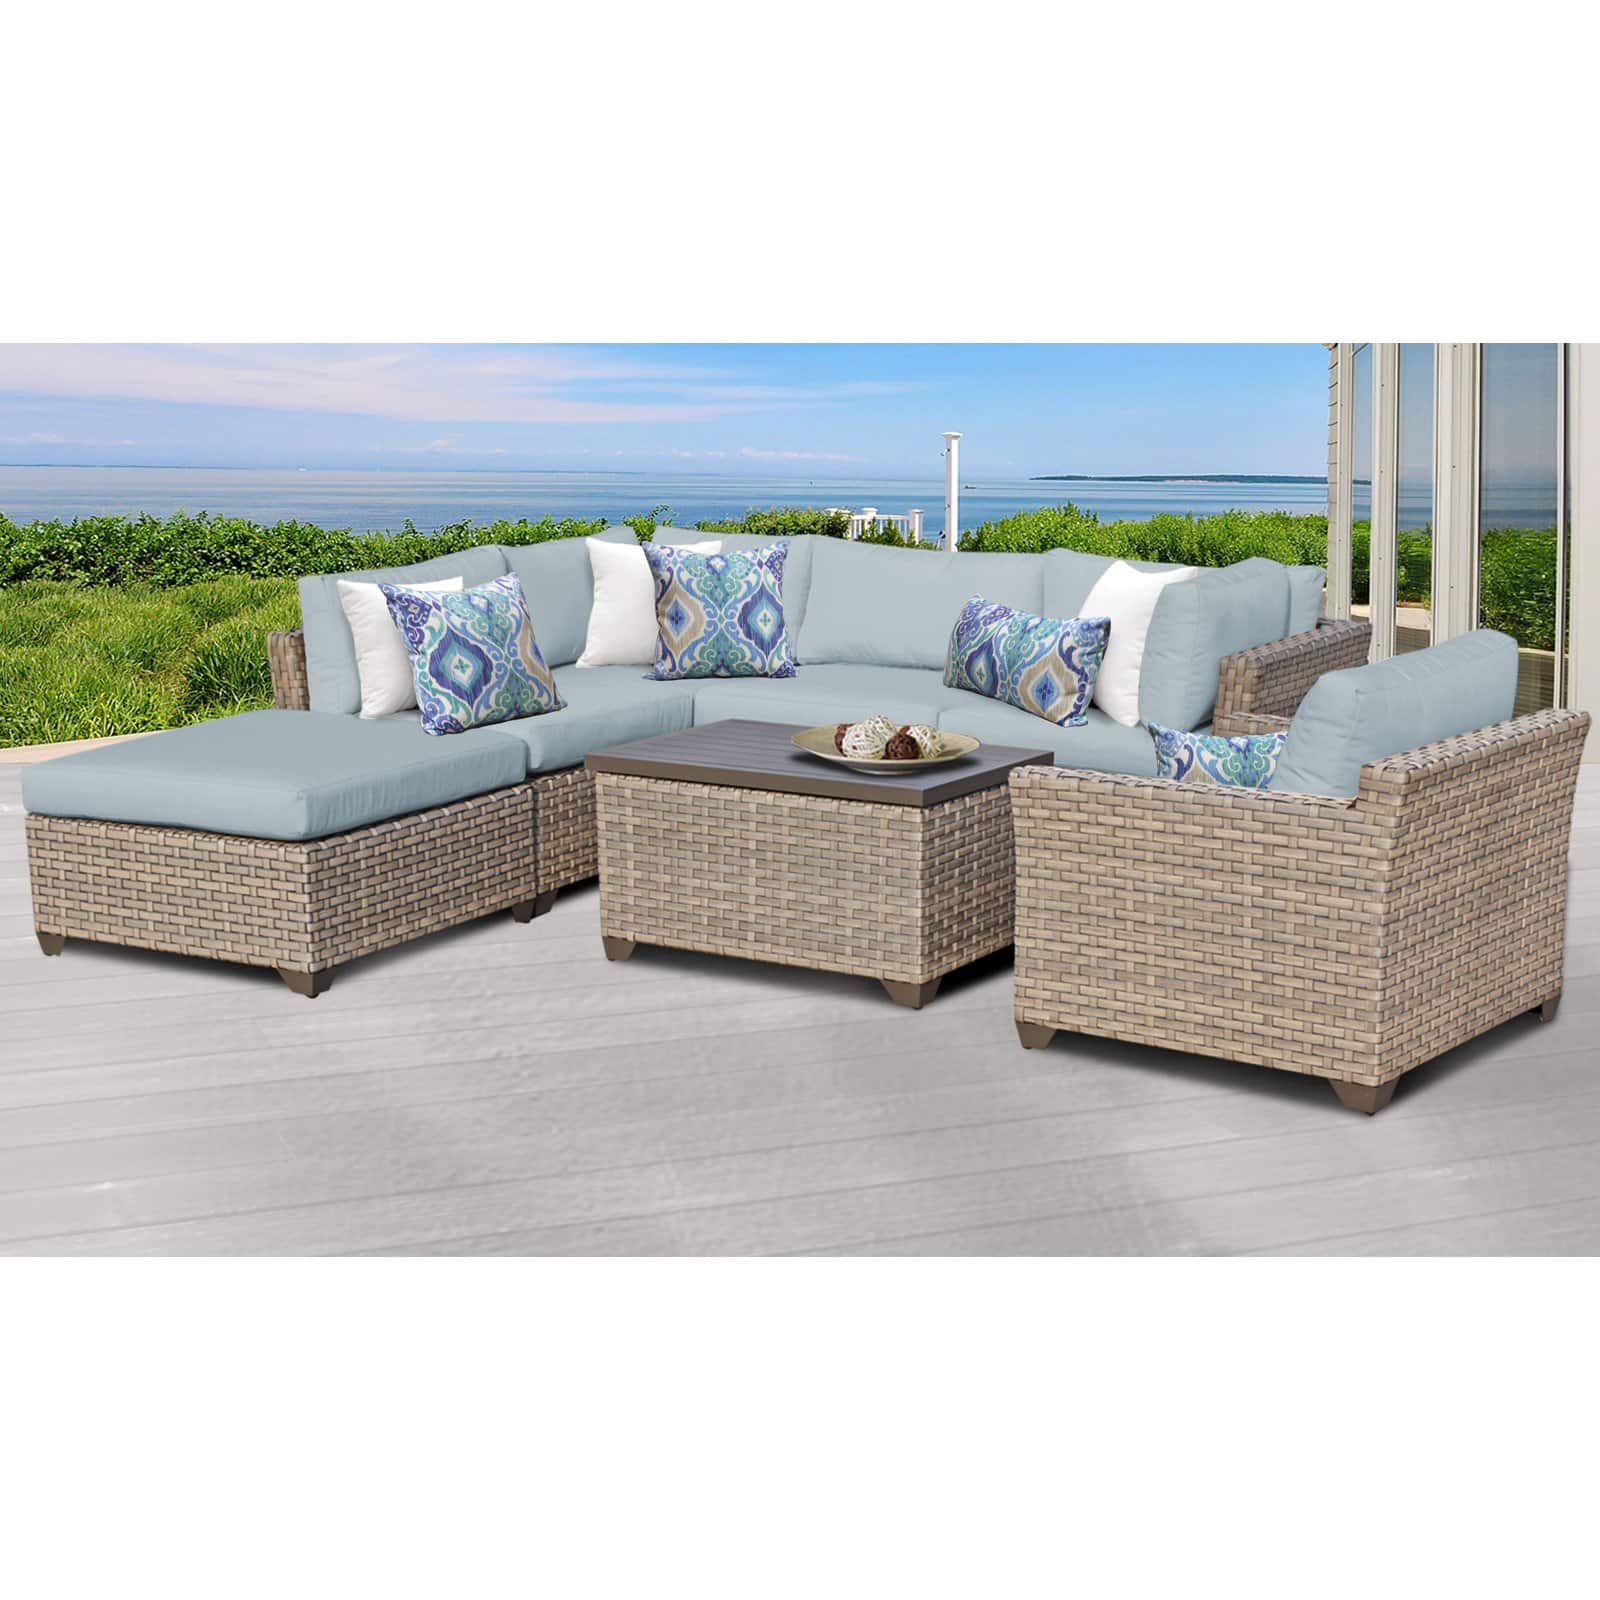 TK Classics Monterey Wicker 7 Piece Patio Conversation Set with Coffee Table and 2 Sets of Cushion Covers - image 4 of 5